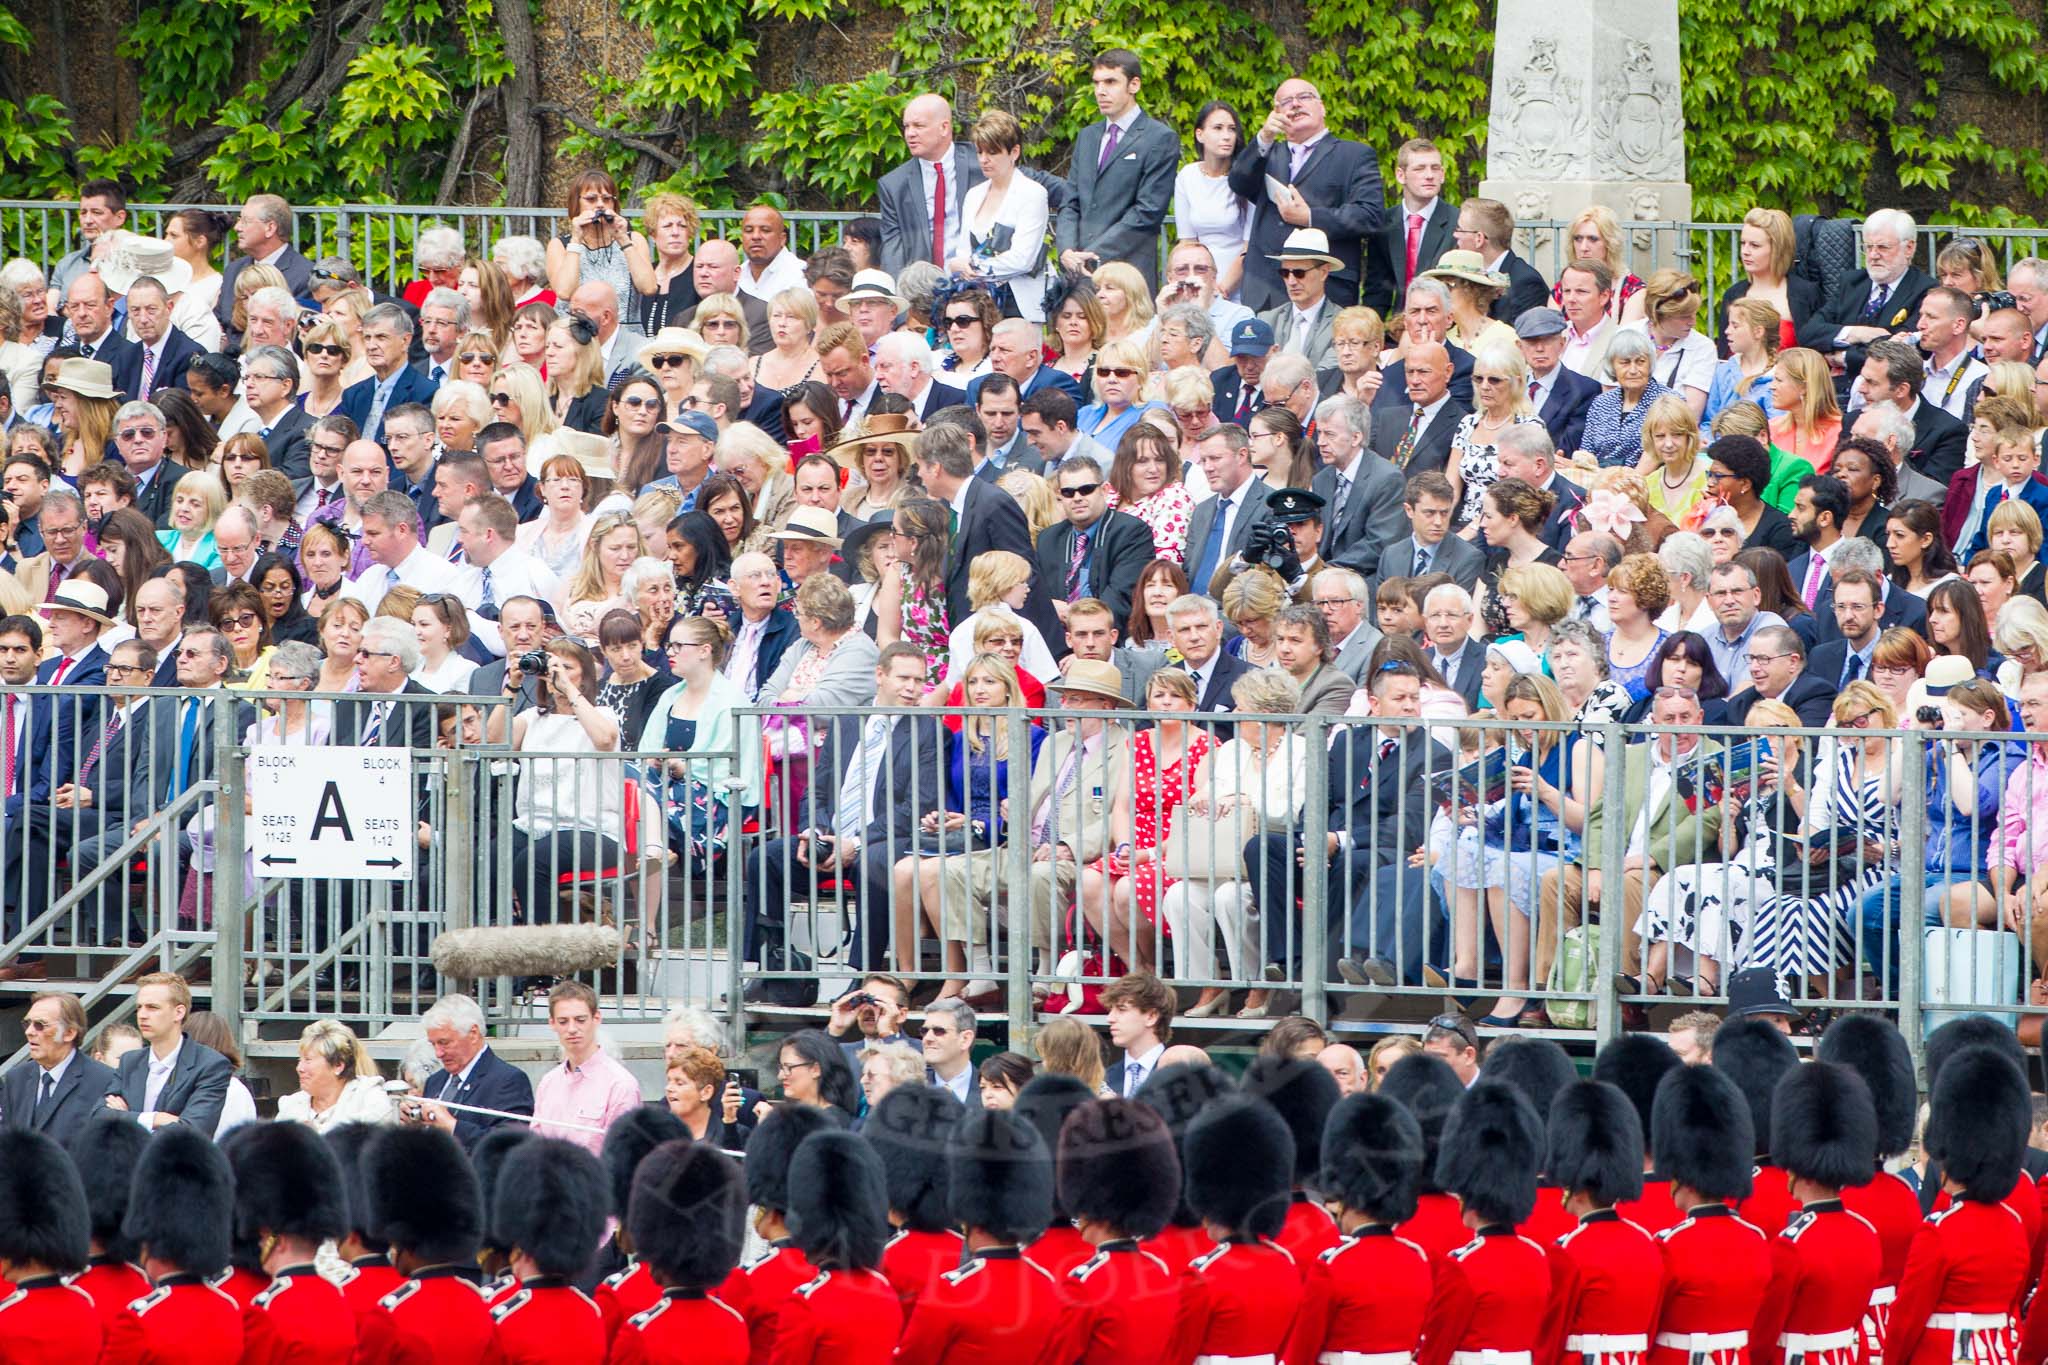 Trooping the Colour 2014.
Horse Guards Parade, Westminster,
London SW1A,

United Kingdom,
on 14 June 2014 at 10:34, image #216